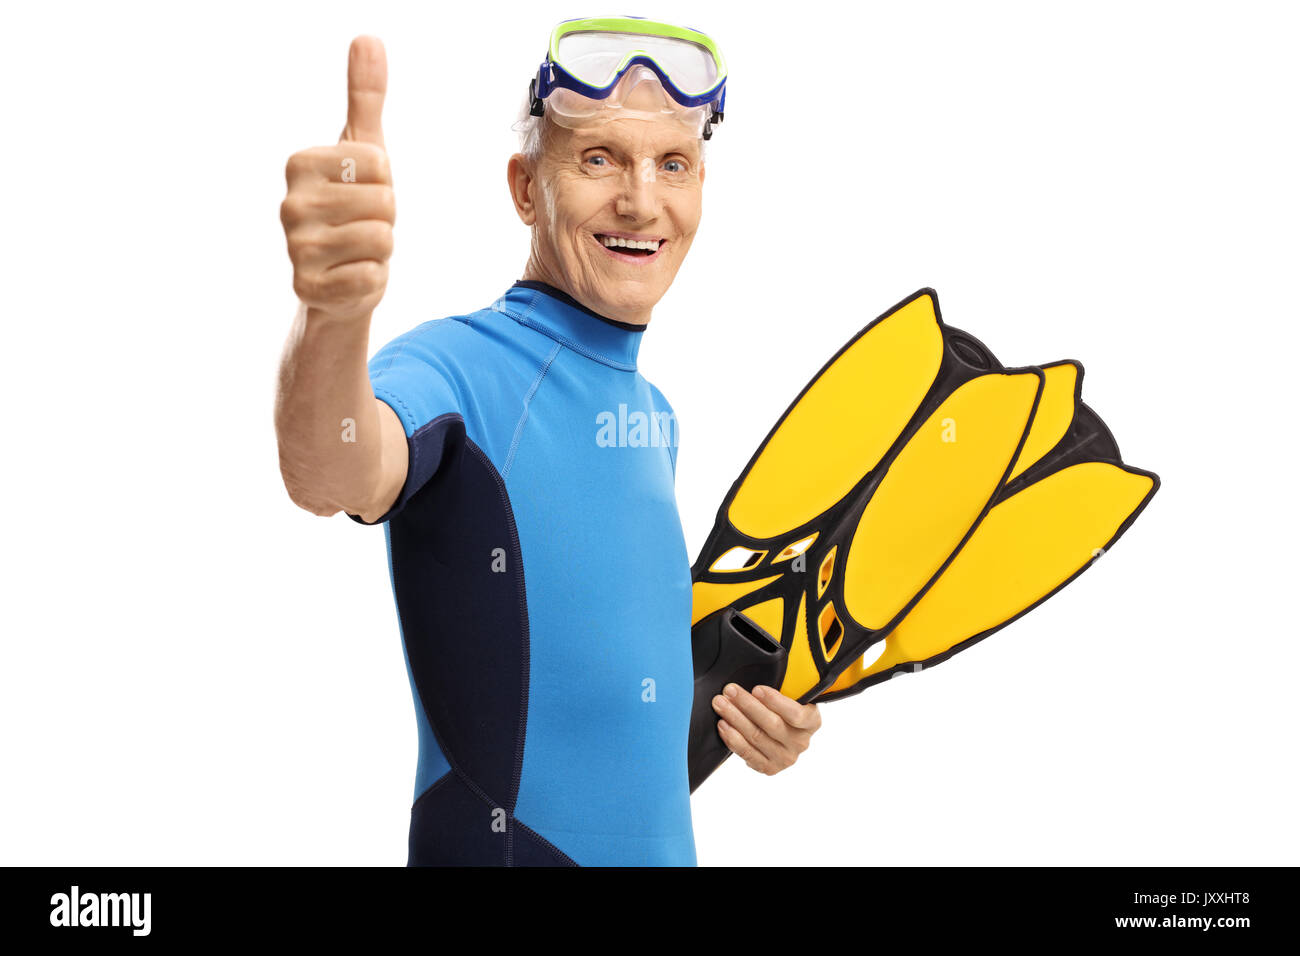 Senior with snorkeling equipment making a thumb up gesture isolated on white background Stock Photo